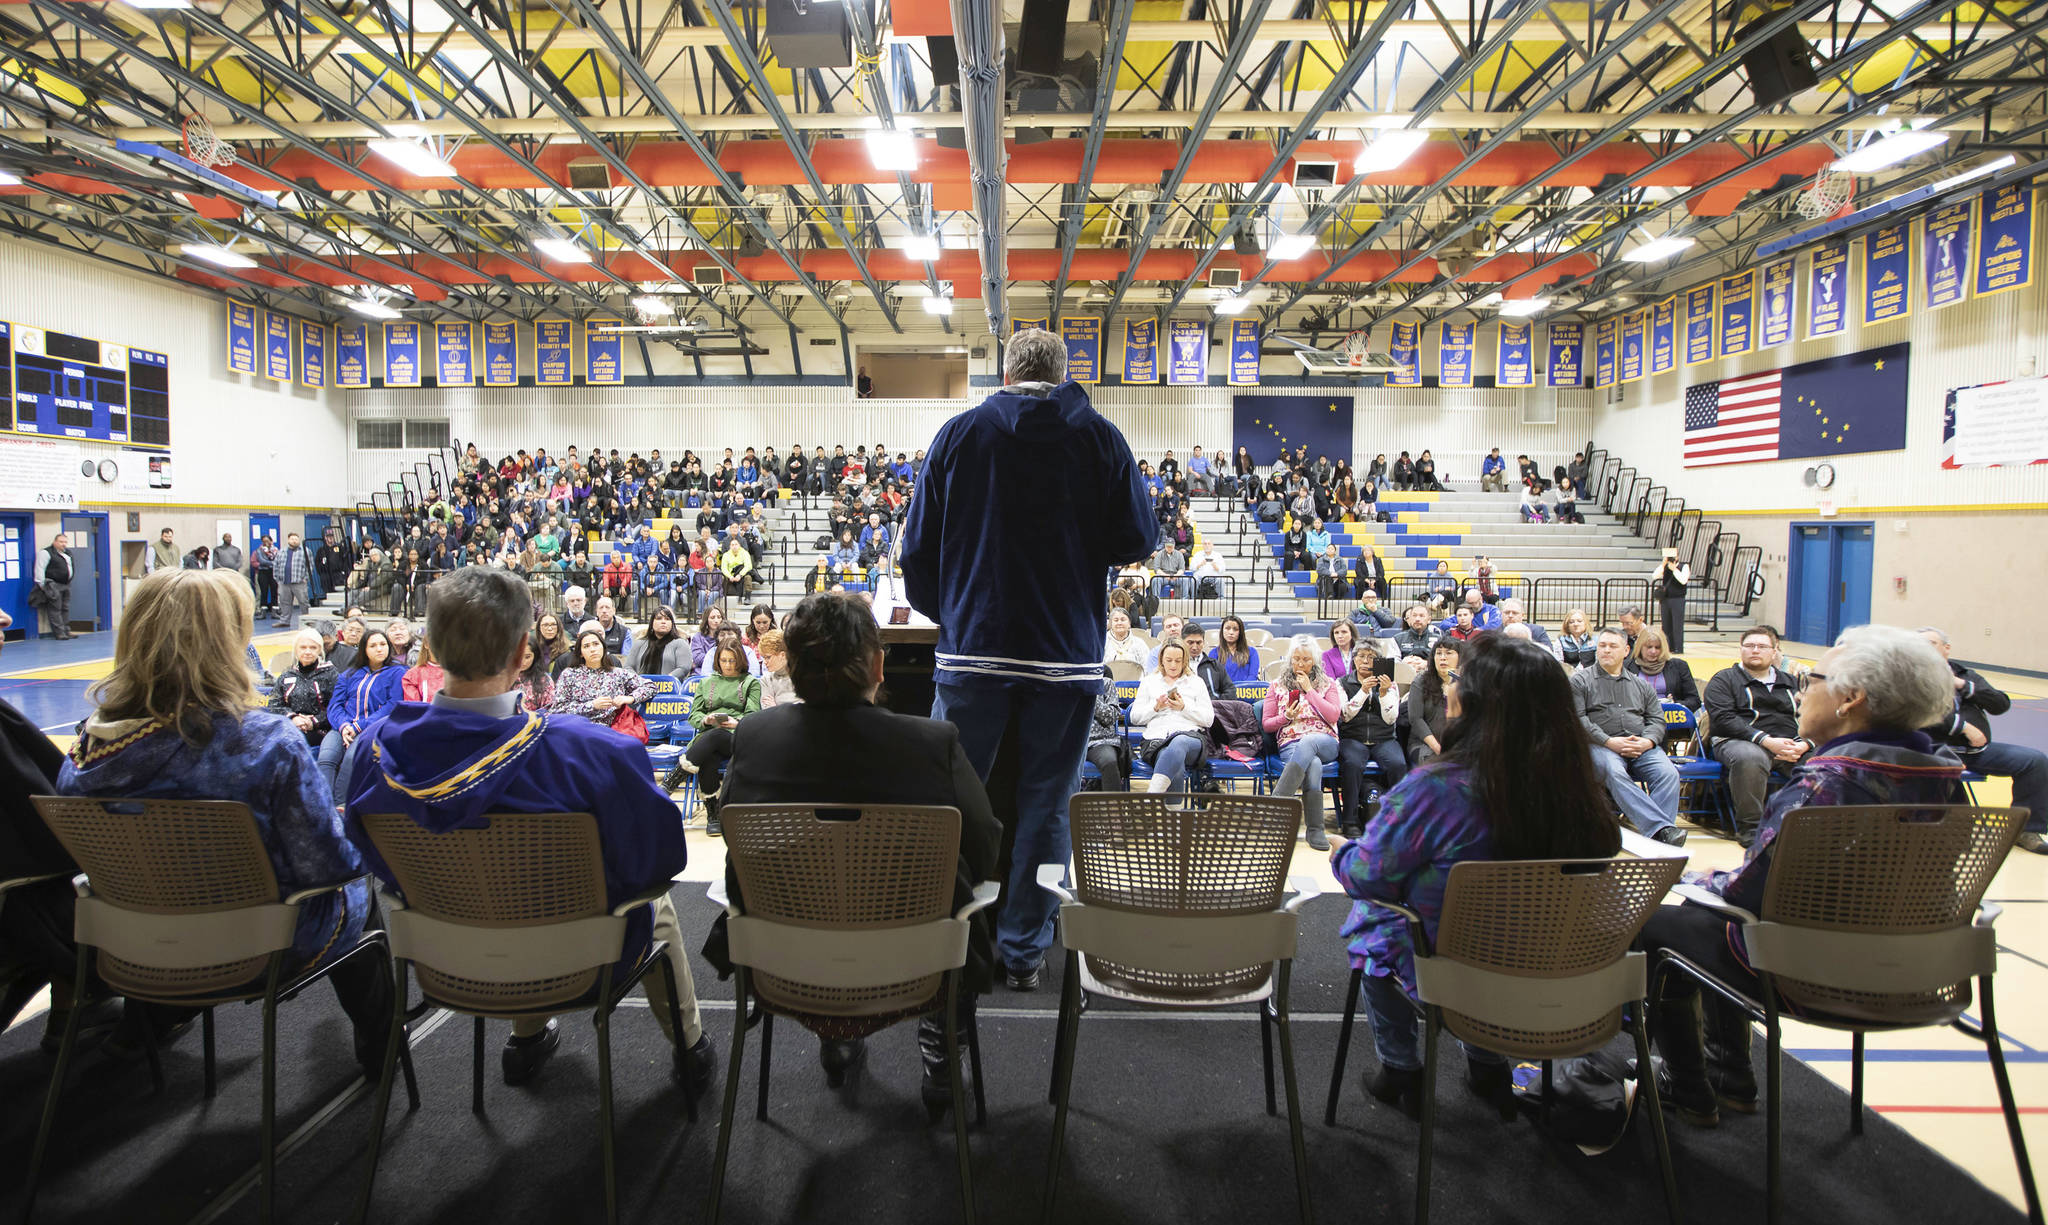 Alaska Gov. Mike Dunleavy addresses the audience in the school gym in Kotzebue, Alaska, after he was sworn into office Monday, Dec. 3, 2018. He had originally planned the ceremony in his wife’s hometown of Noorvik, Alaska, but poor weather prevented his plane from landing there and the ceremony was moved to Kotzebue.(Stanley Wright/Alaska Governor’s Office via AP)